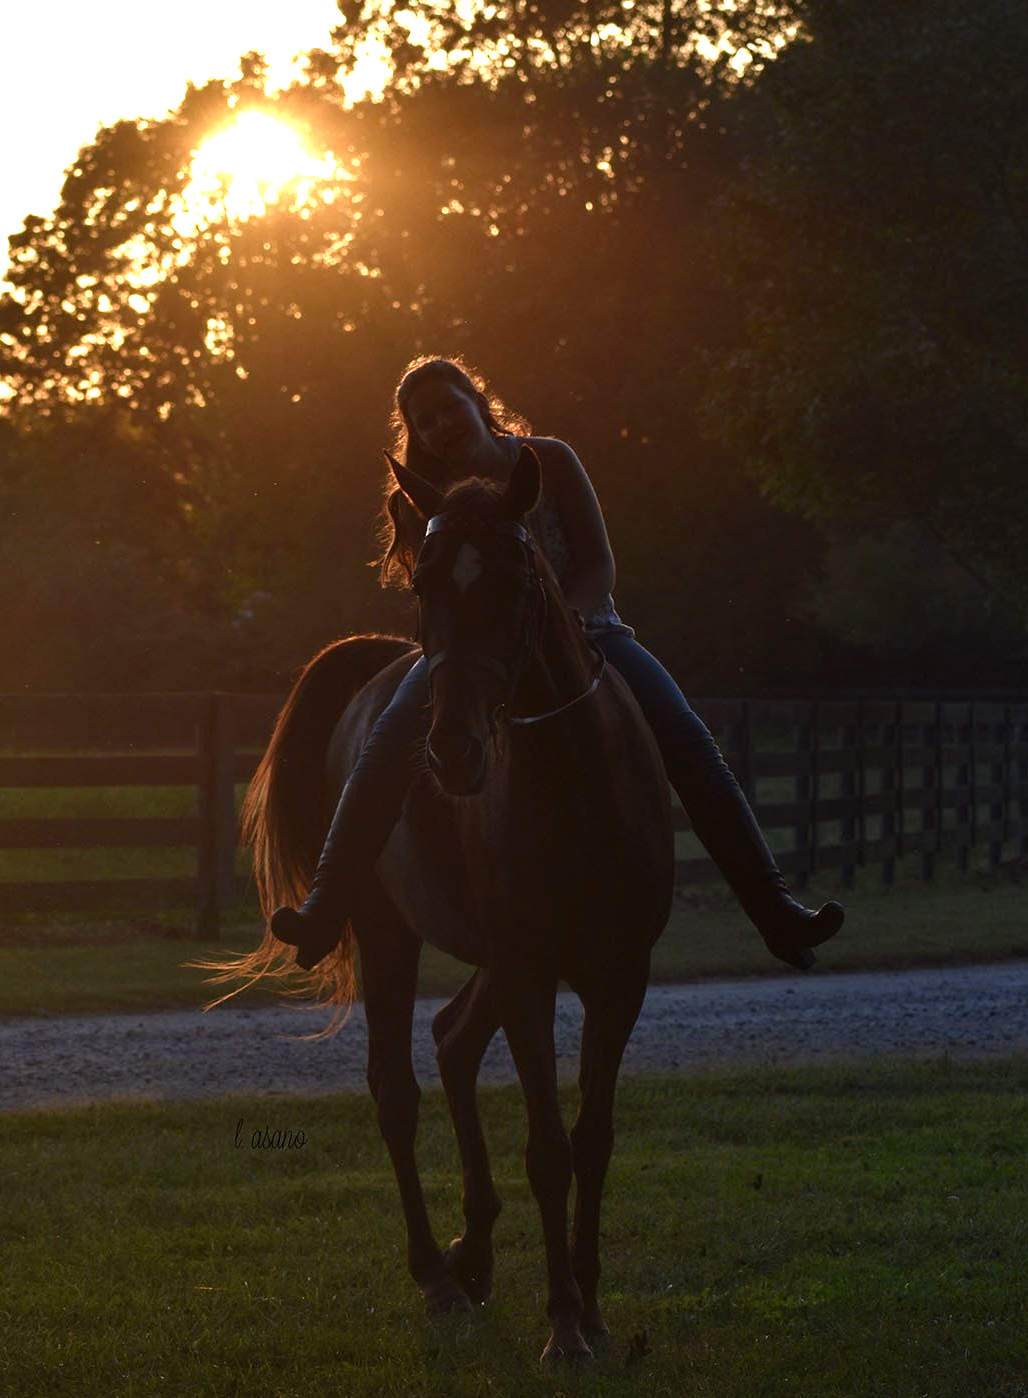 photo of girl on American Saddlebred with setting sun in background